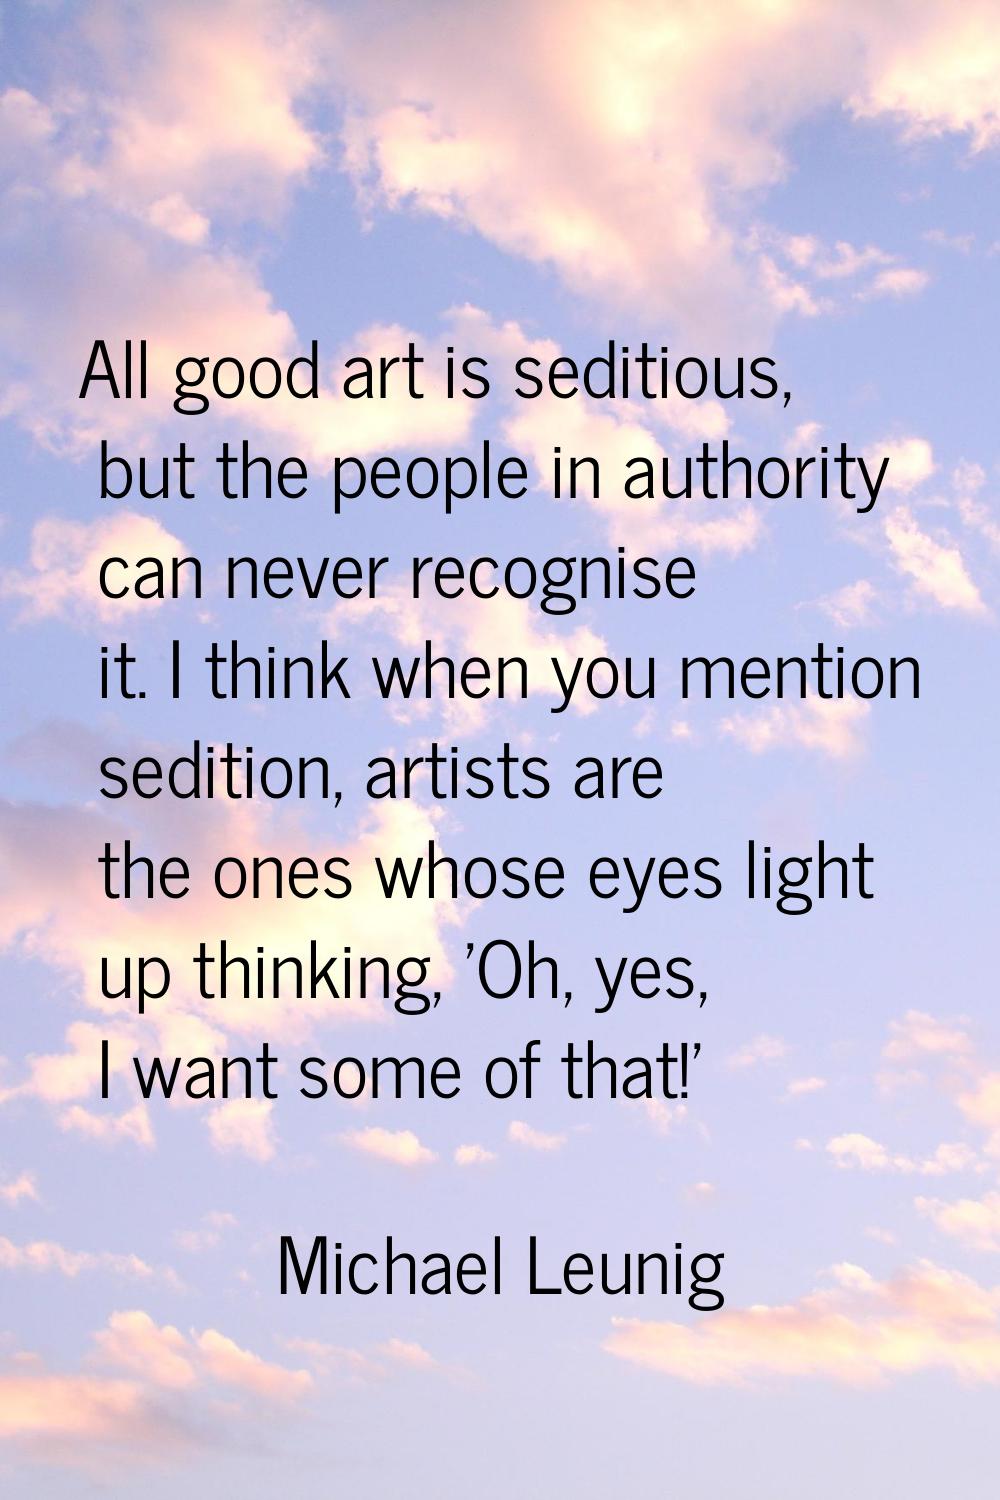 All good art is seditious, but the people in authority can never recognise it. I think when you men